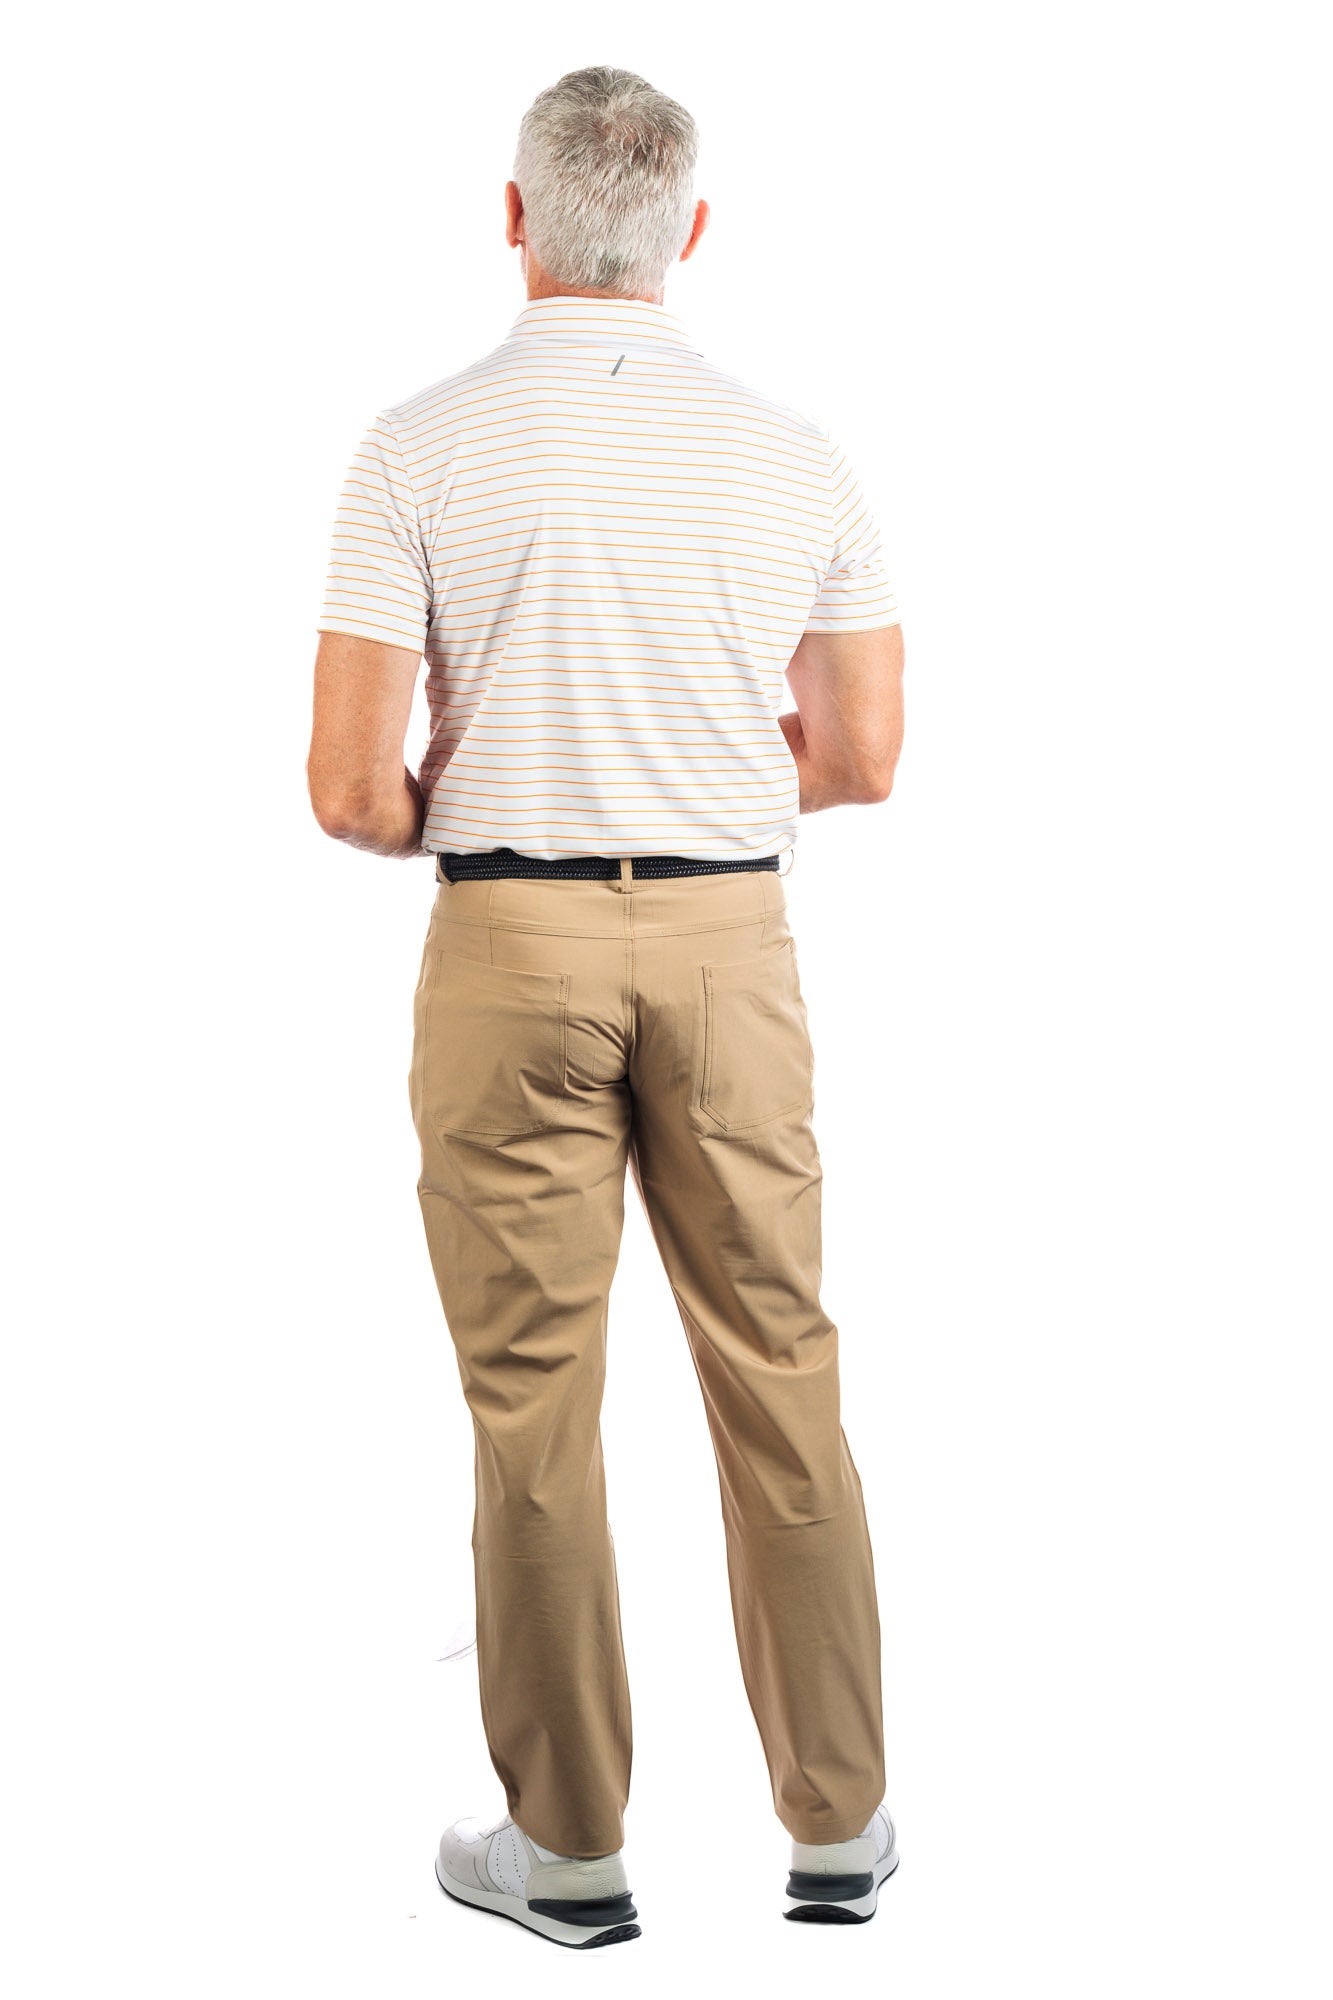 Backside photo of model wearing the Orange striped golf polo on a white background. 